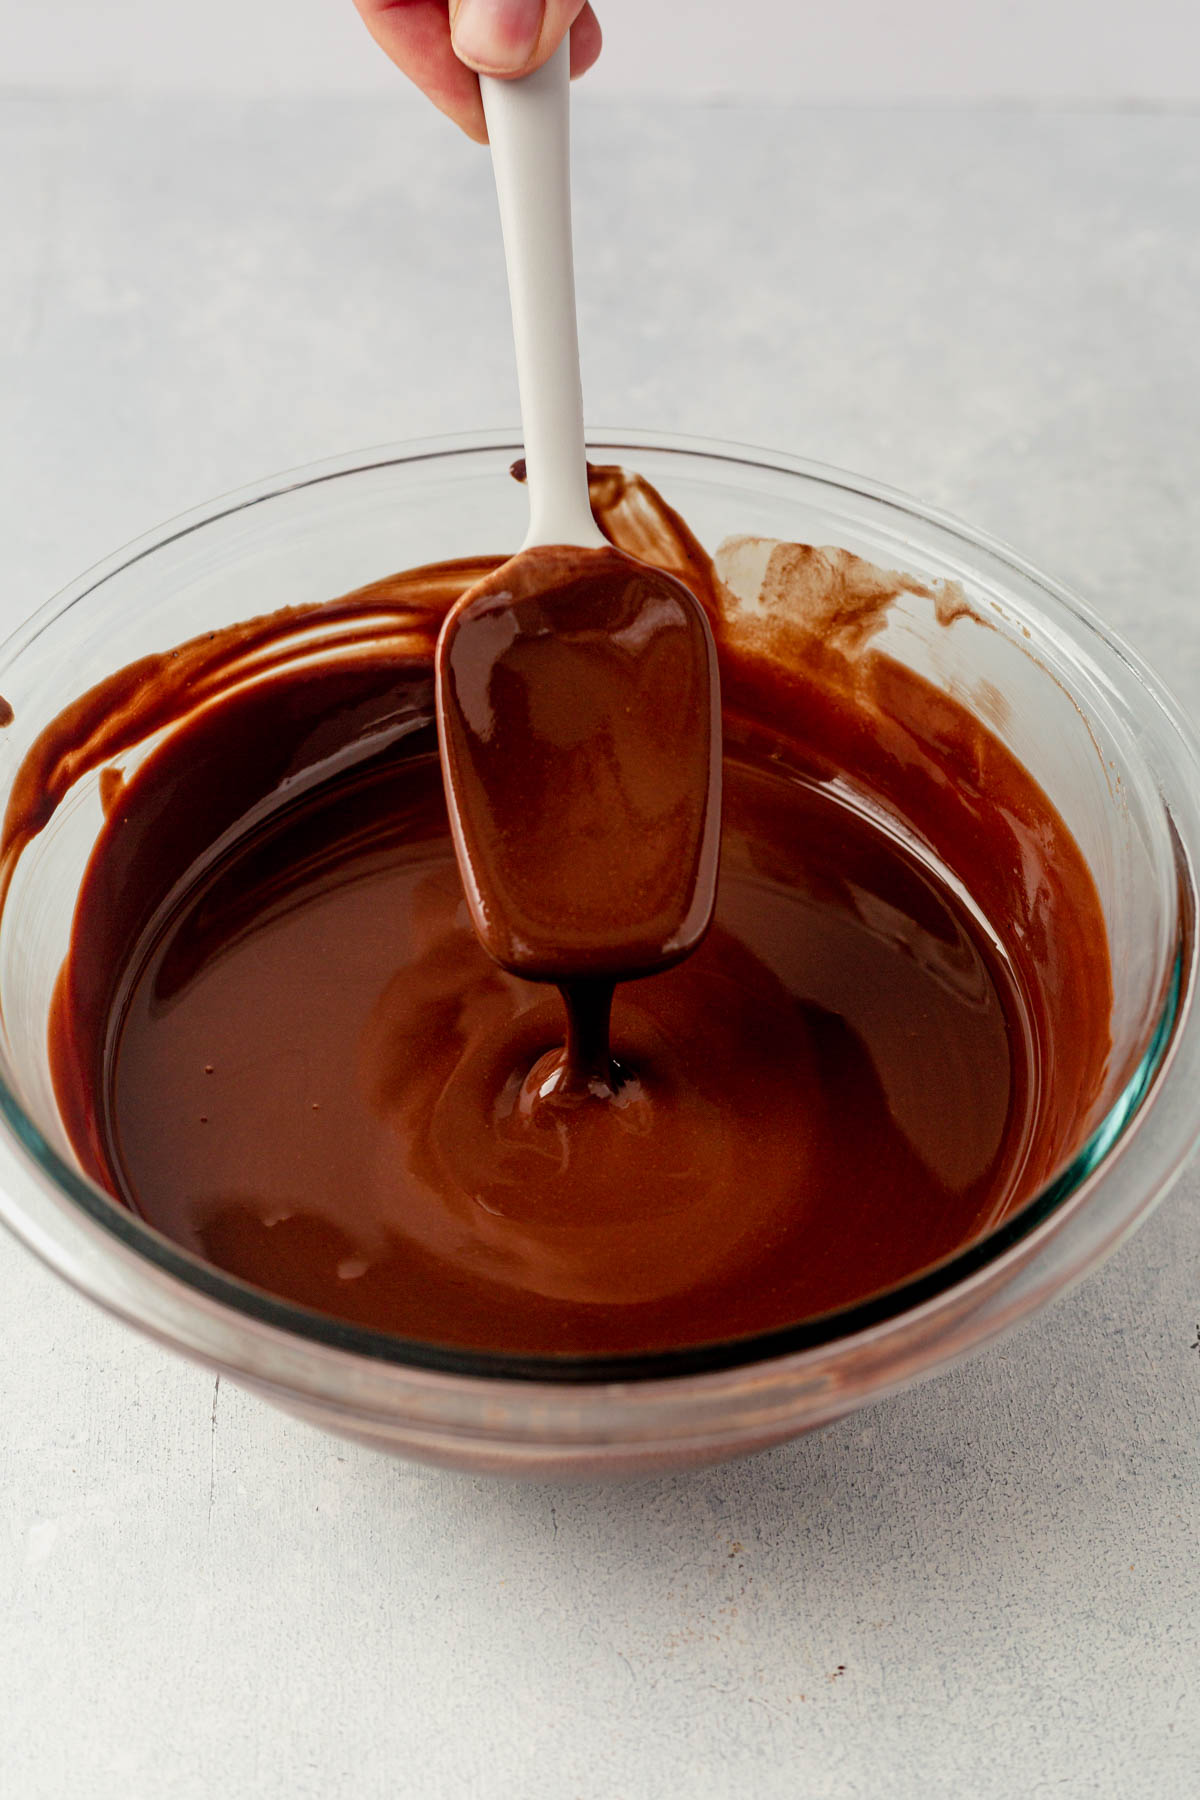 melted chocolate and tahini in a glass bowl